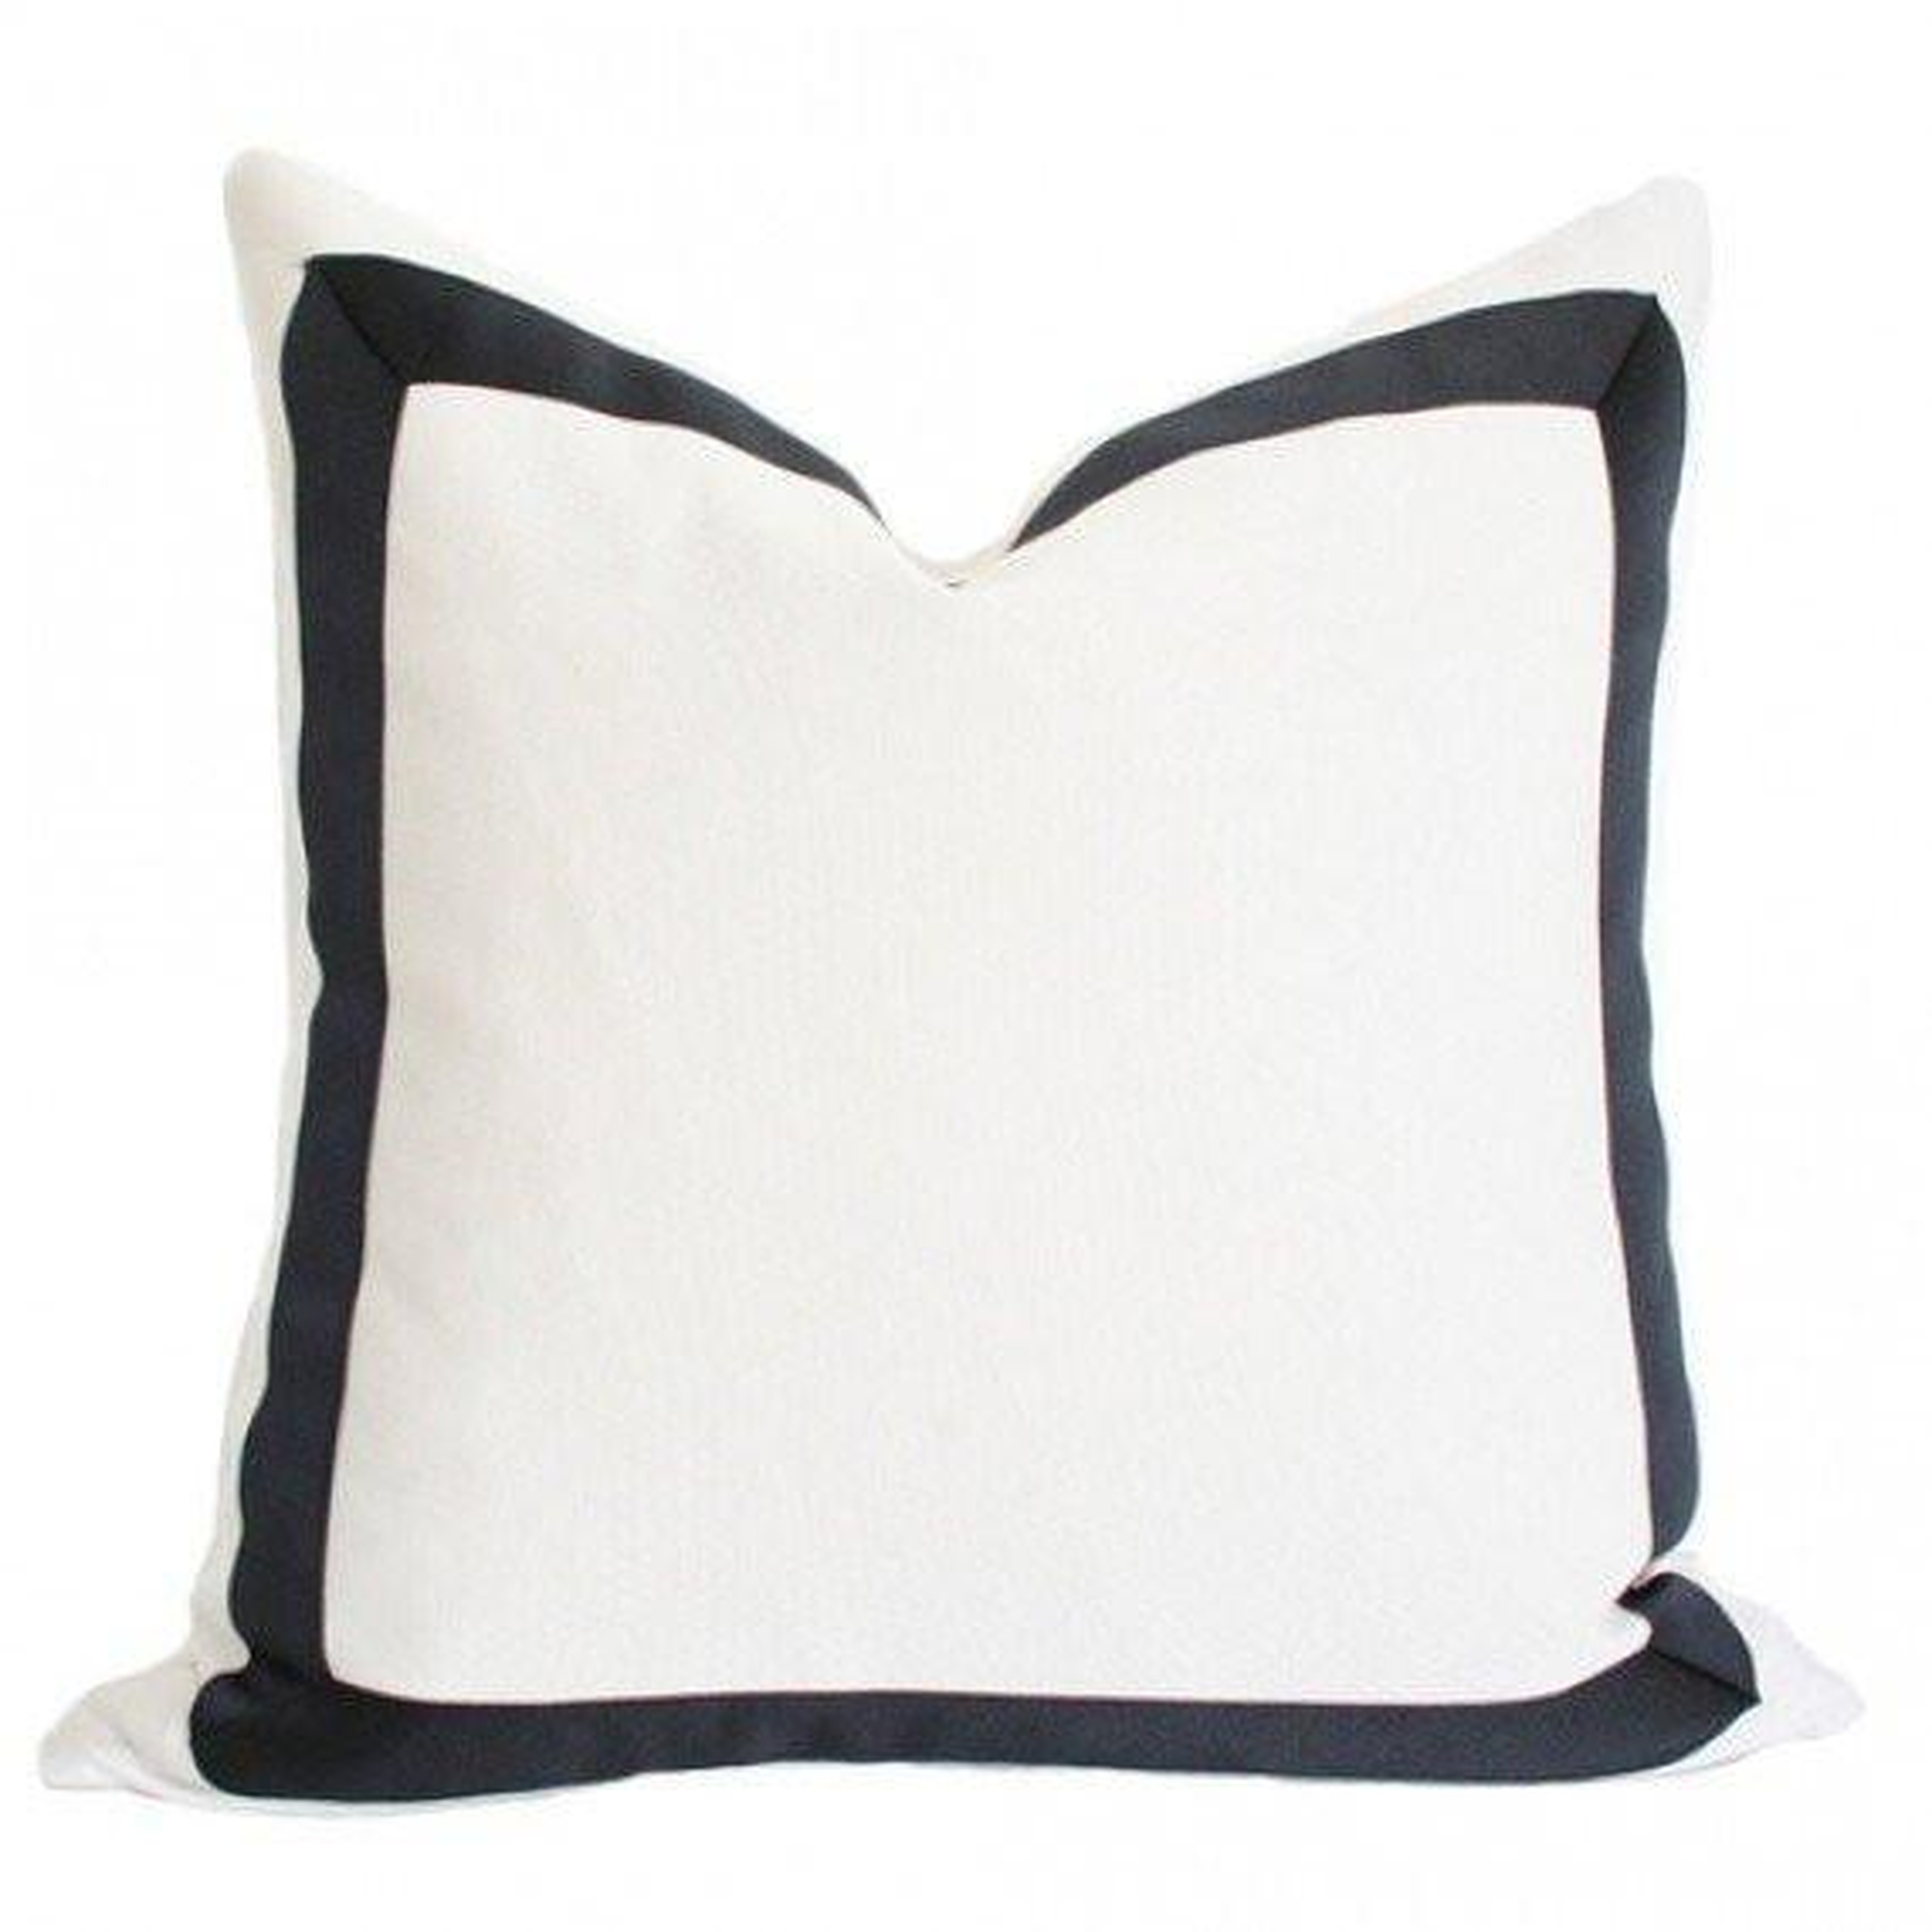 Solid White with Grosgrain Ribbon Border - 20x20 pillow cover (medium) / Navy - Arianna Belle